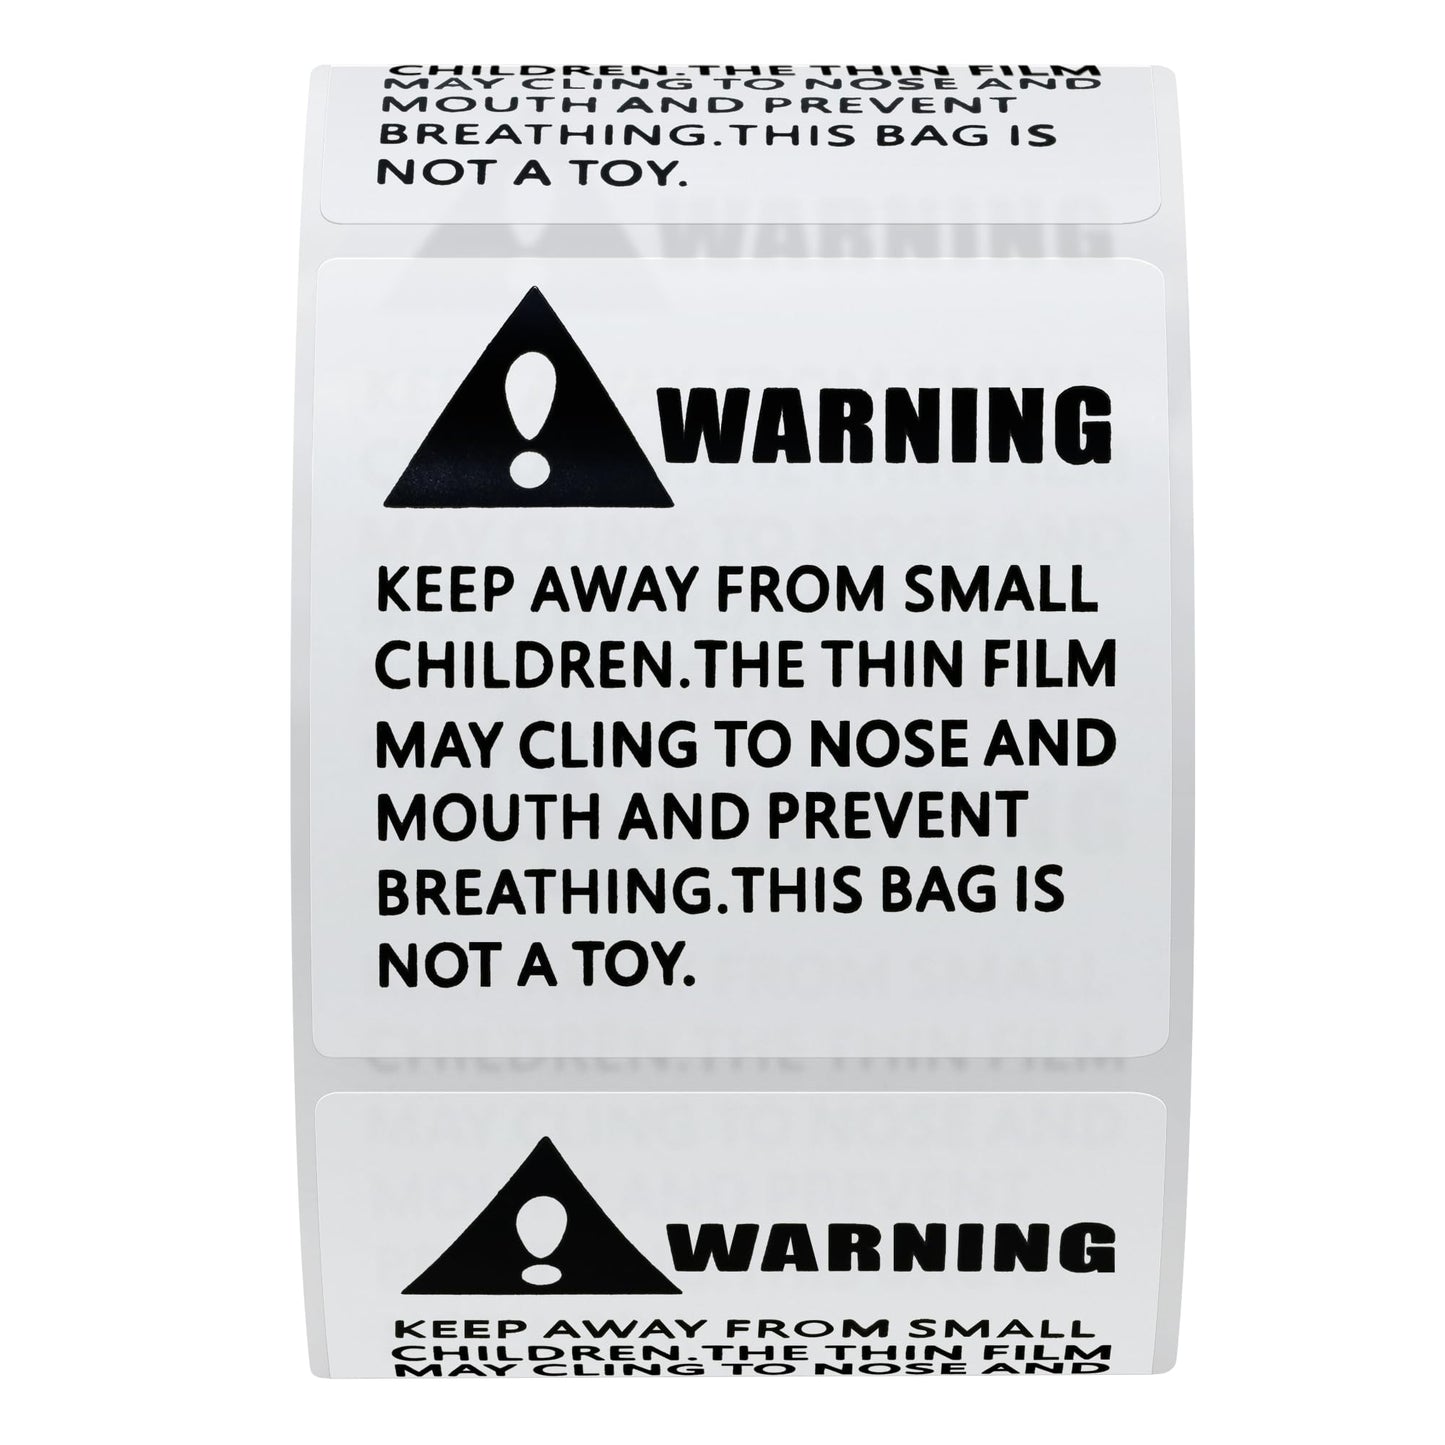 Hybsk 2x2 inch Warning Labels for Poly Bags and Packaging |Stickers Adhesive Label 500 Per Roll